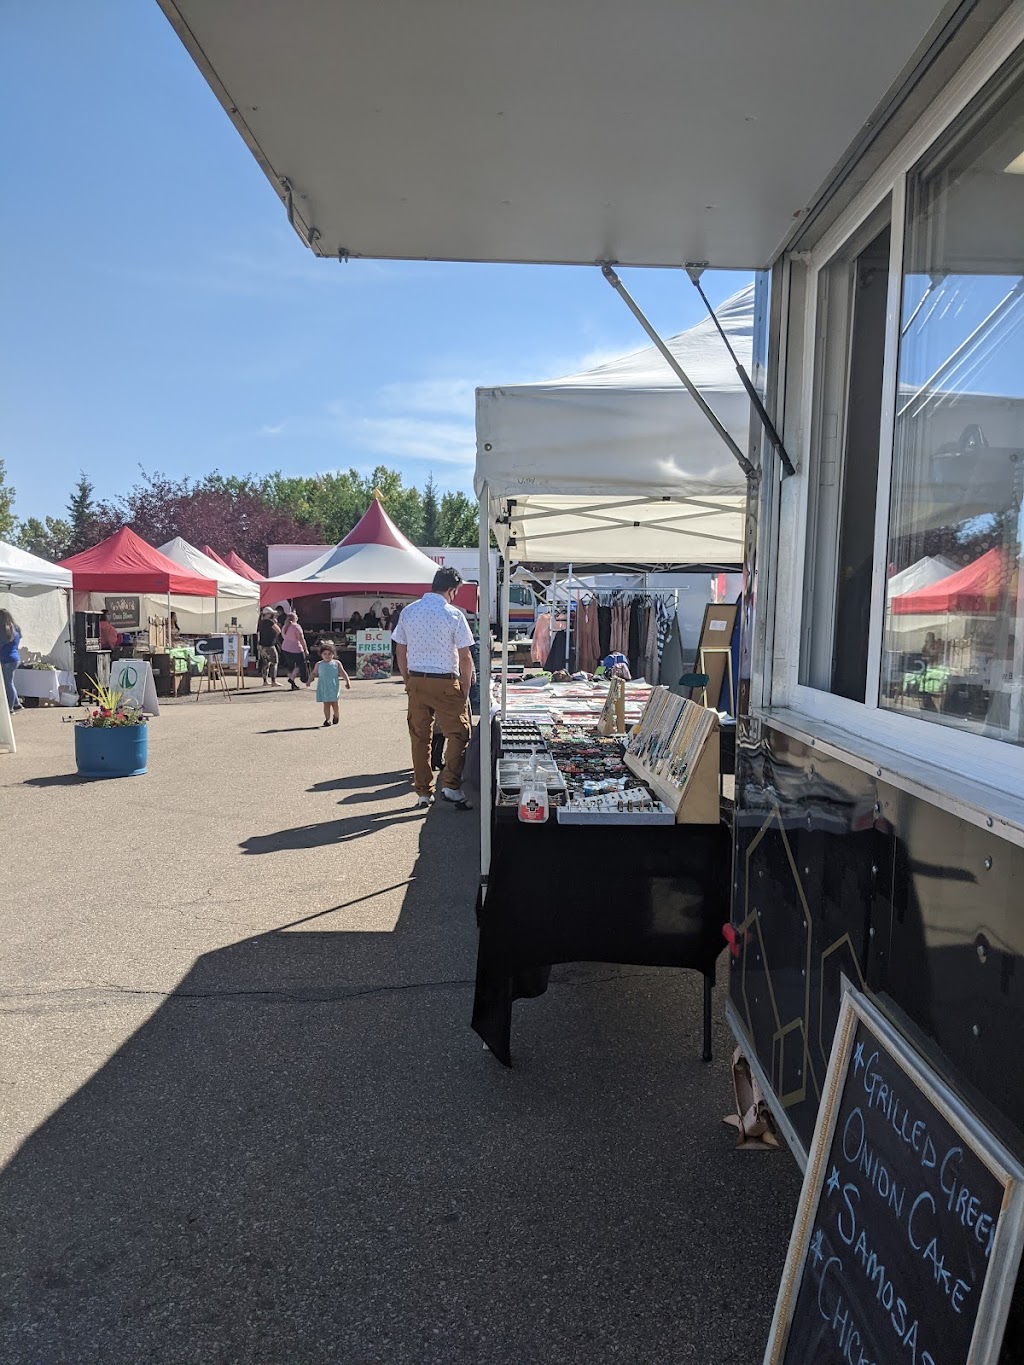 South Common Farmers Market is opening on May 7, 2022 to Oct. 17th, 2022 | Parsons Road &, 19 Ave NW, Edmonton, AB T6N 1H5, Canada | Phone: (780) 686-5882